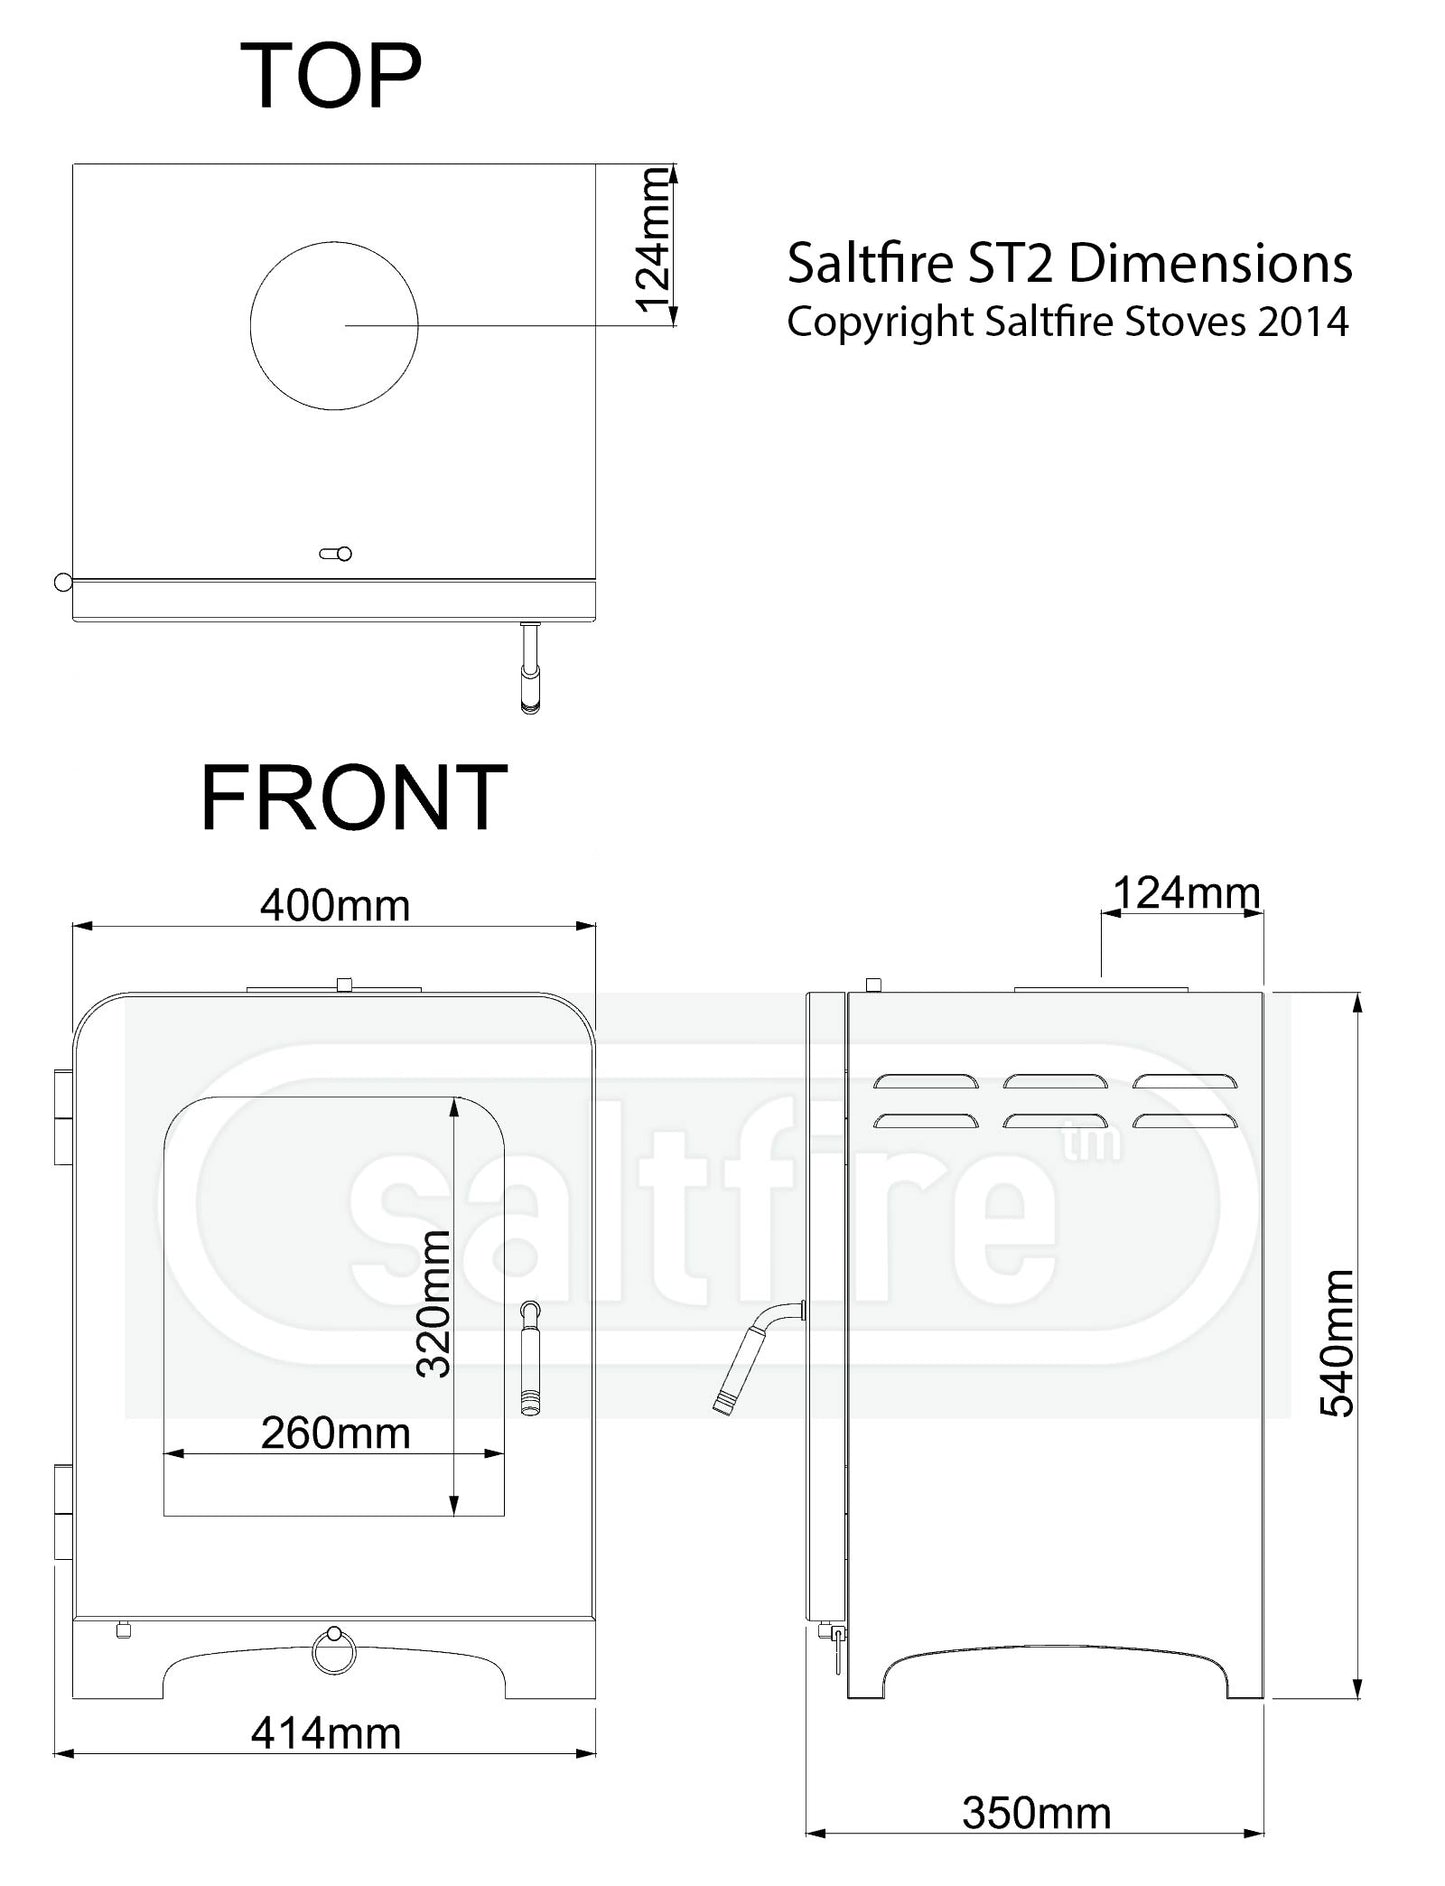 Dimensions and specifications for the ST2  multifuel stove